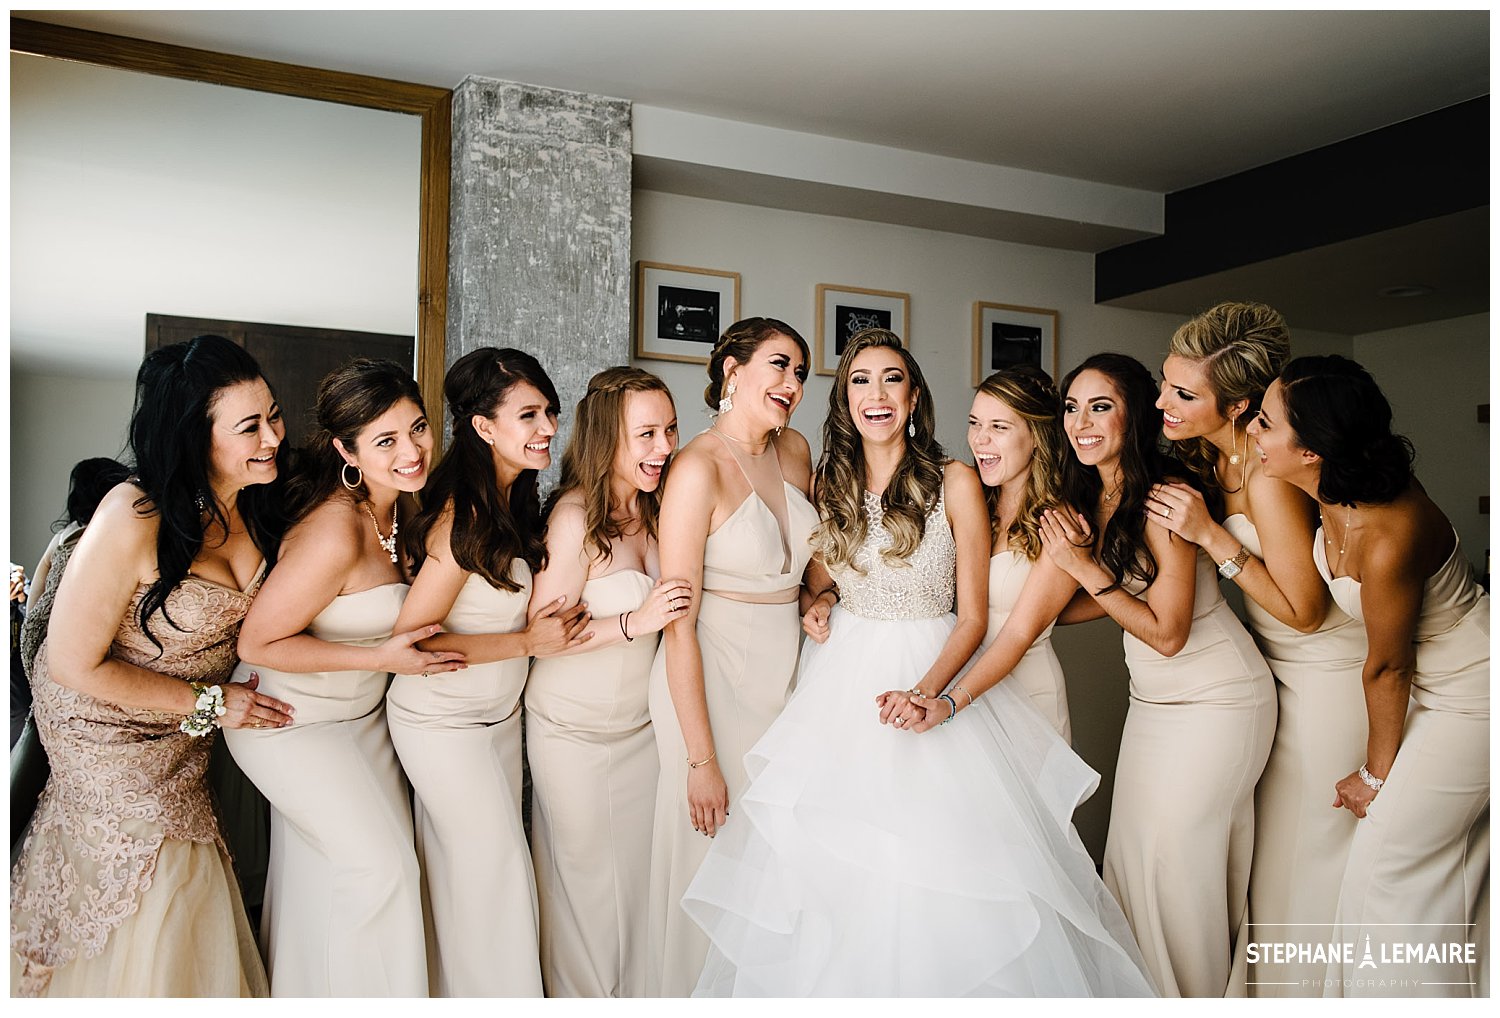 Bride with bridesmaids getting ready at Hotel Indigo in el paso texas by stephane lemaire photography